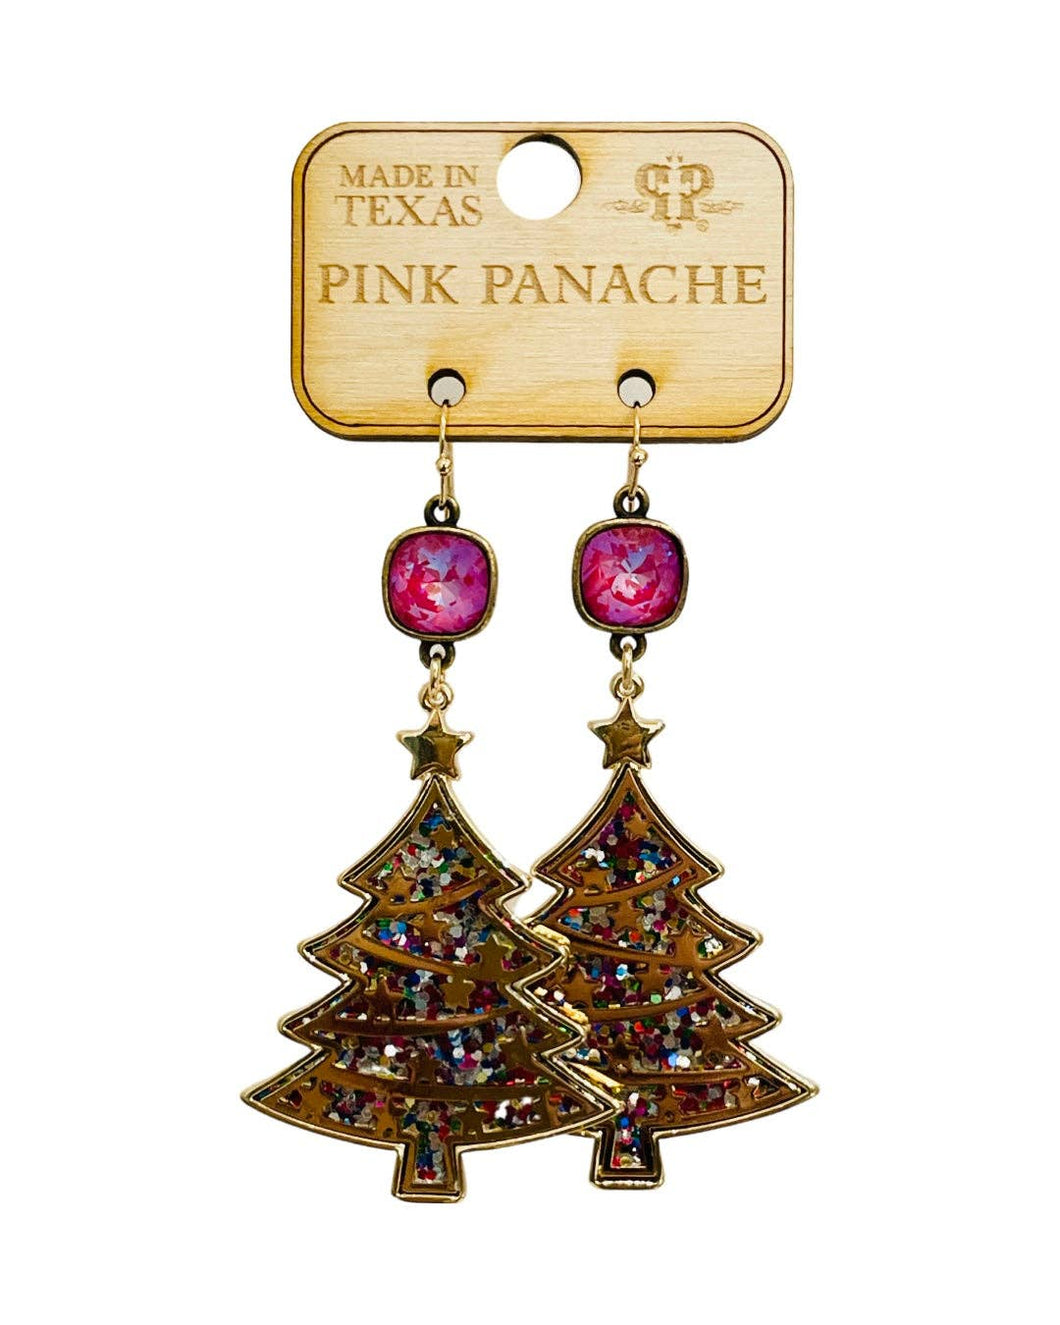 1CNC CH279 * 10mm bronze/royal red delite connector on gold and multi-color glitter Christmas tree earring